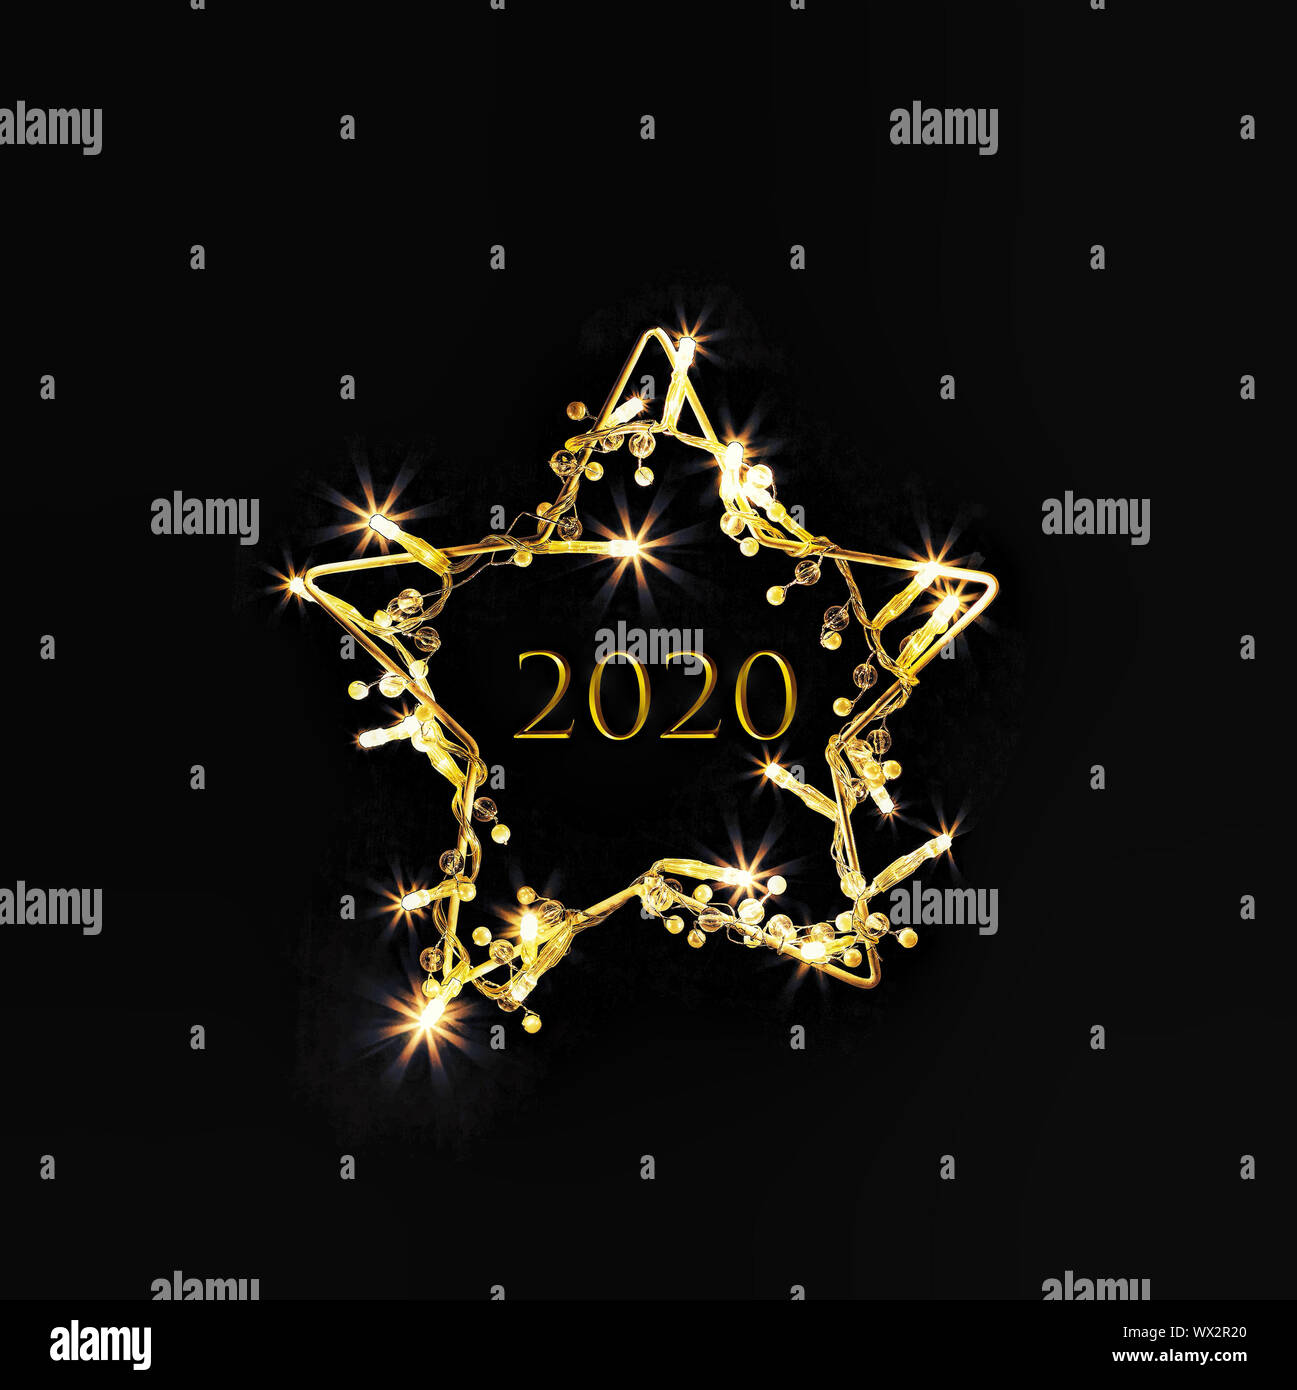 2020, banner, symbol, New Year, golden star, golden, numbers, Stock Photo